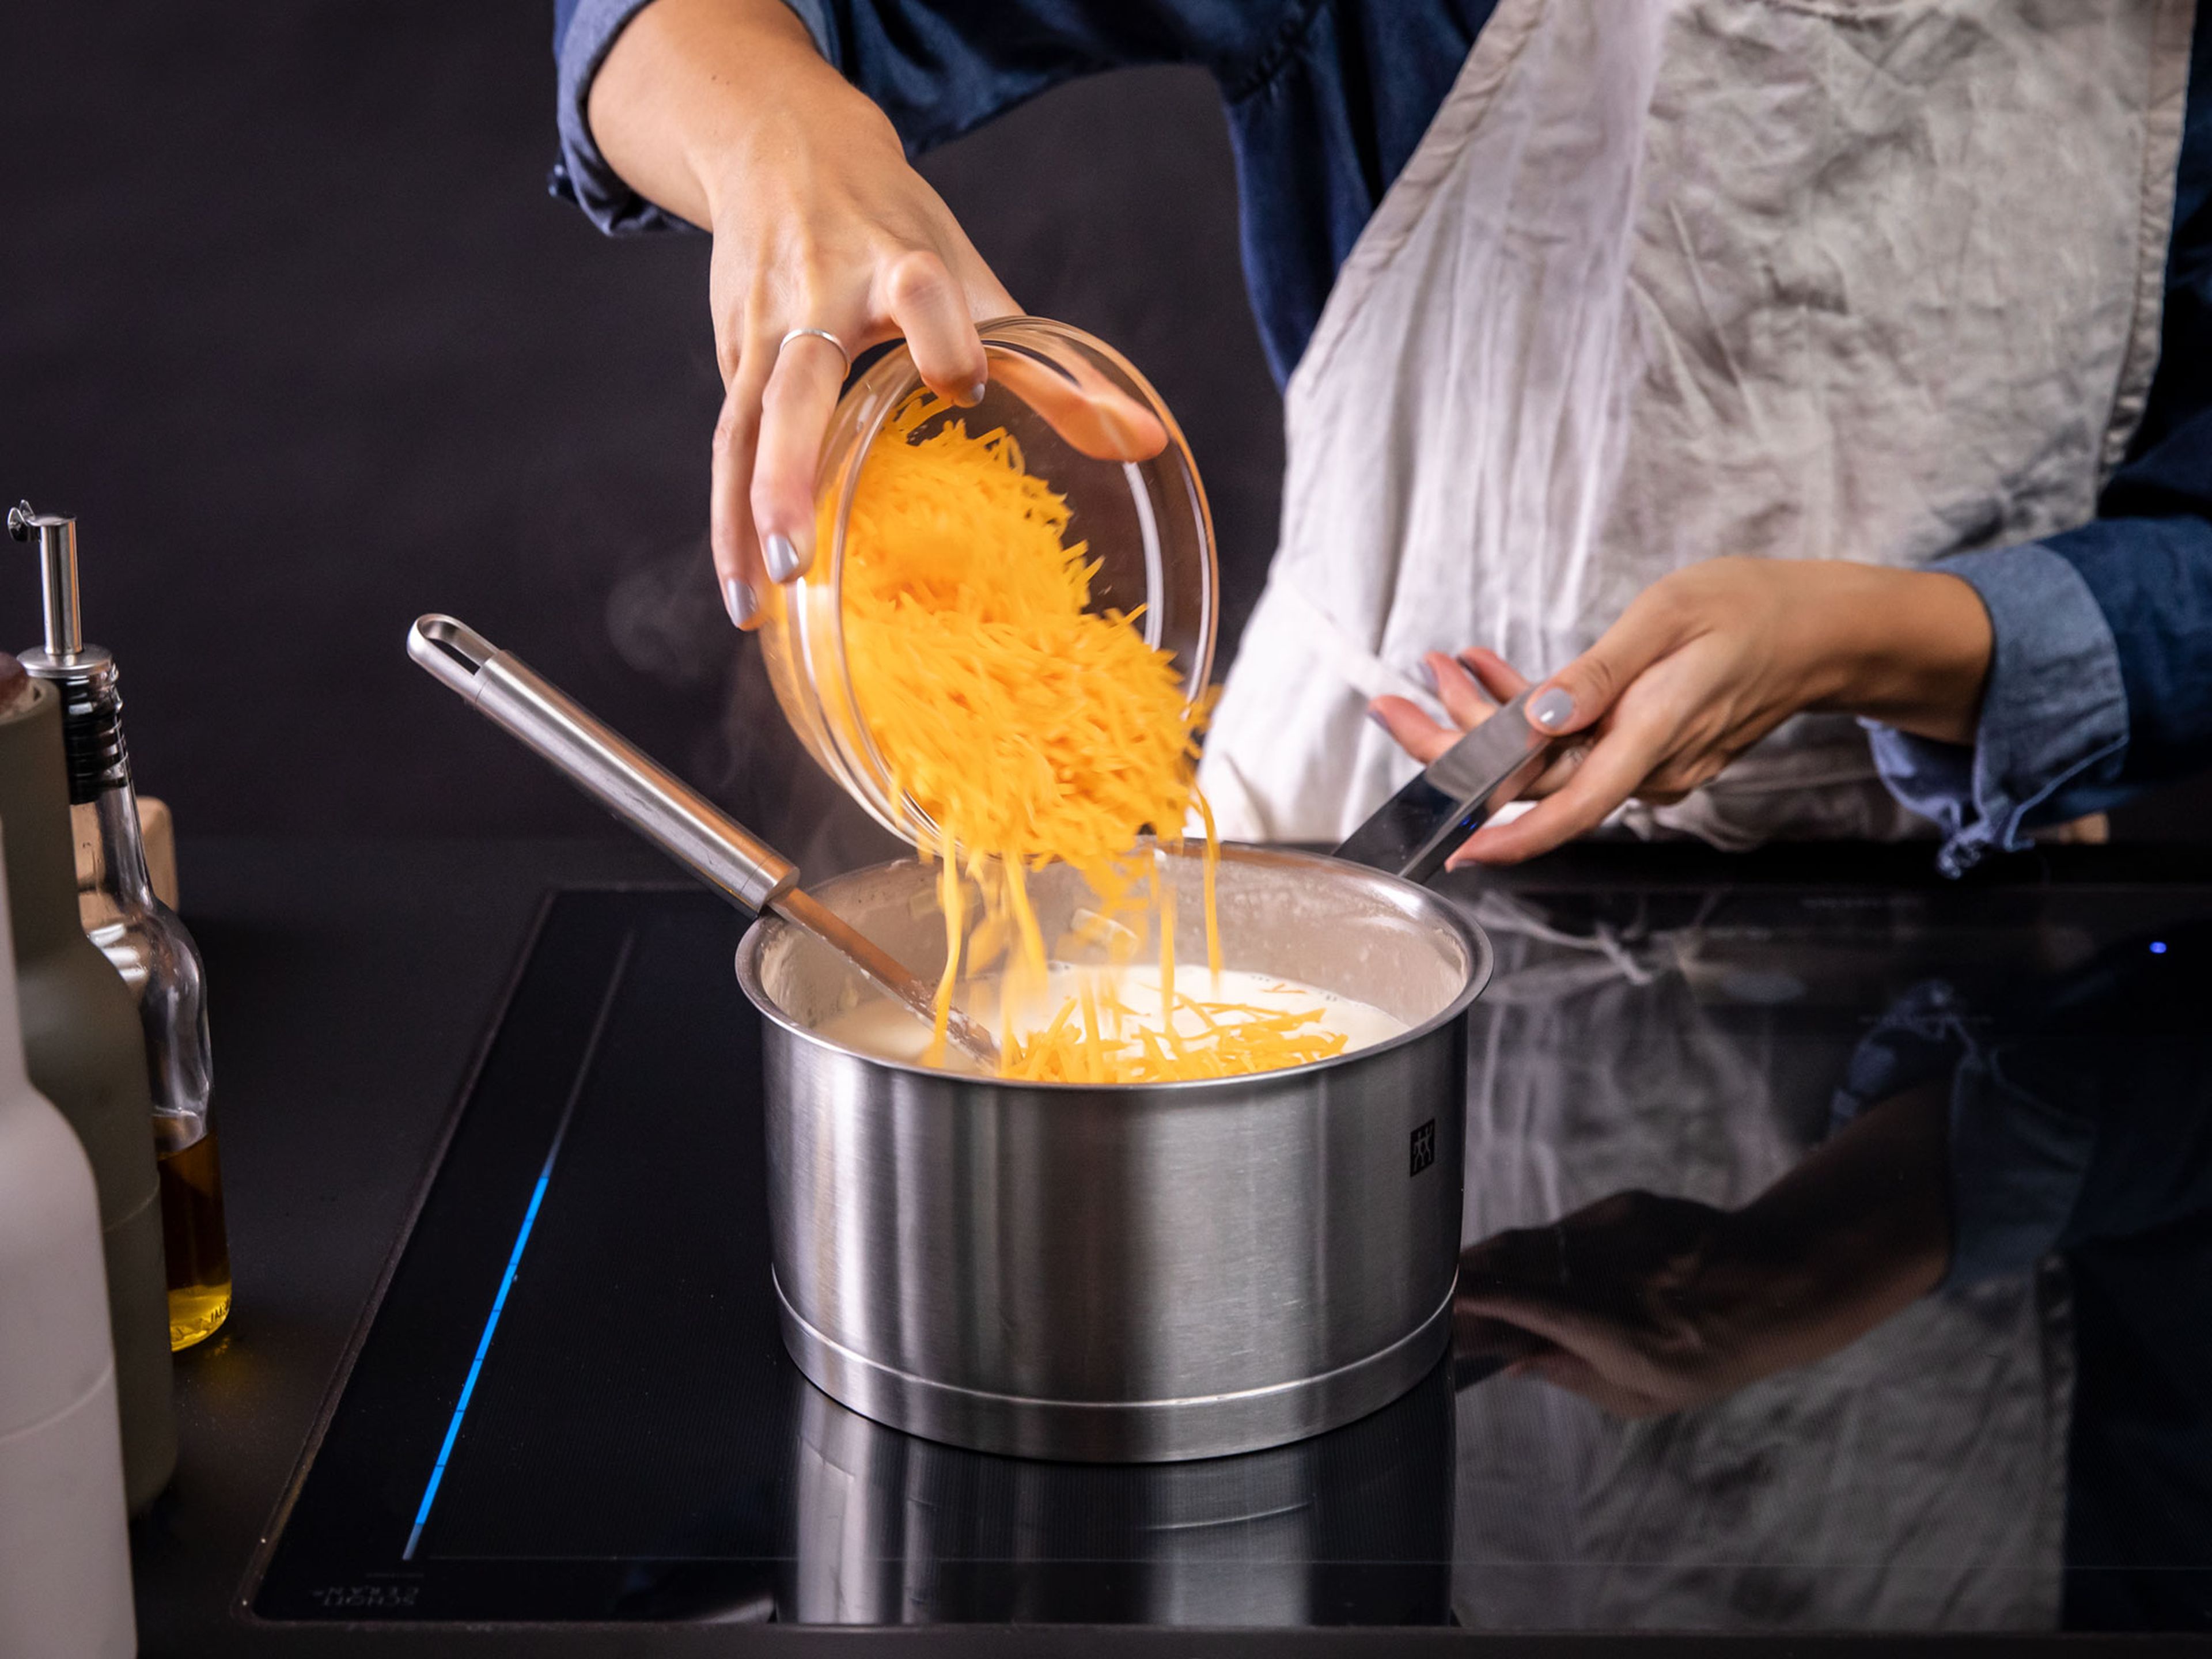 Stir in remaining butter and two-thirds of shredded cheddar cheese. Once cheese has melted and mixture is creamy, add ham and stir to combine.